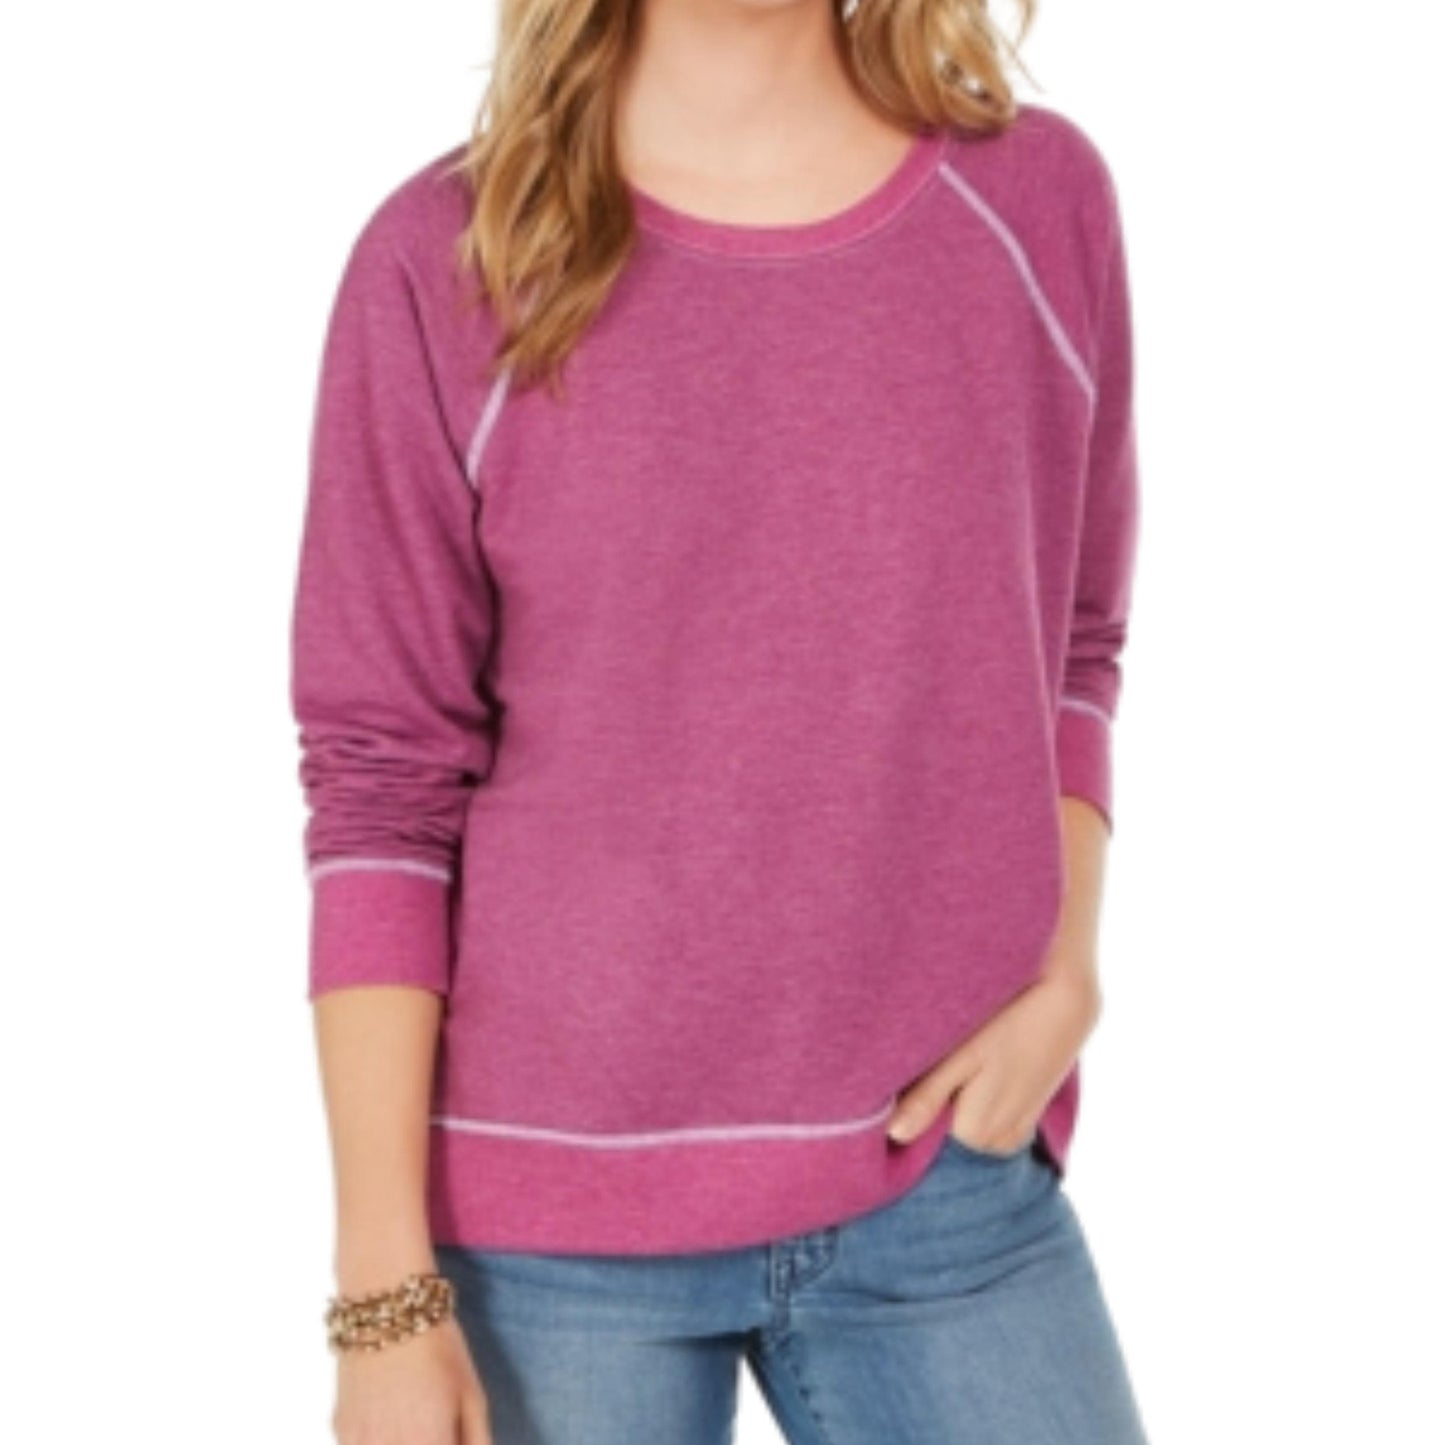 STYLE & CO. Womens Tops M / Purple STYLE & CO. - Contrast-Stitched Sweatshirt